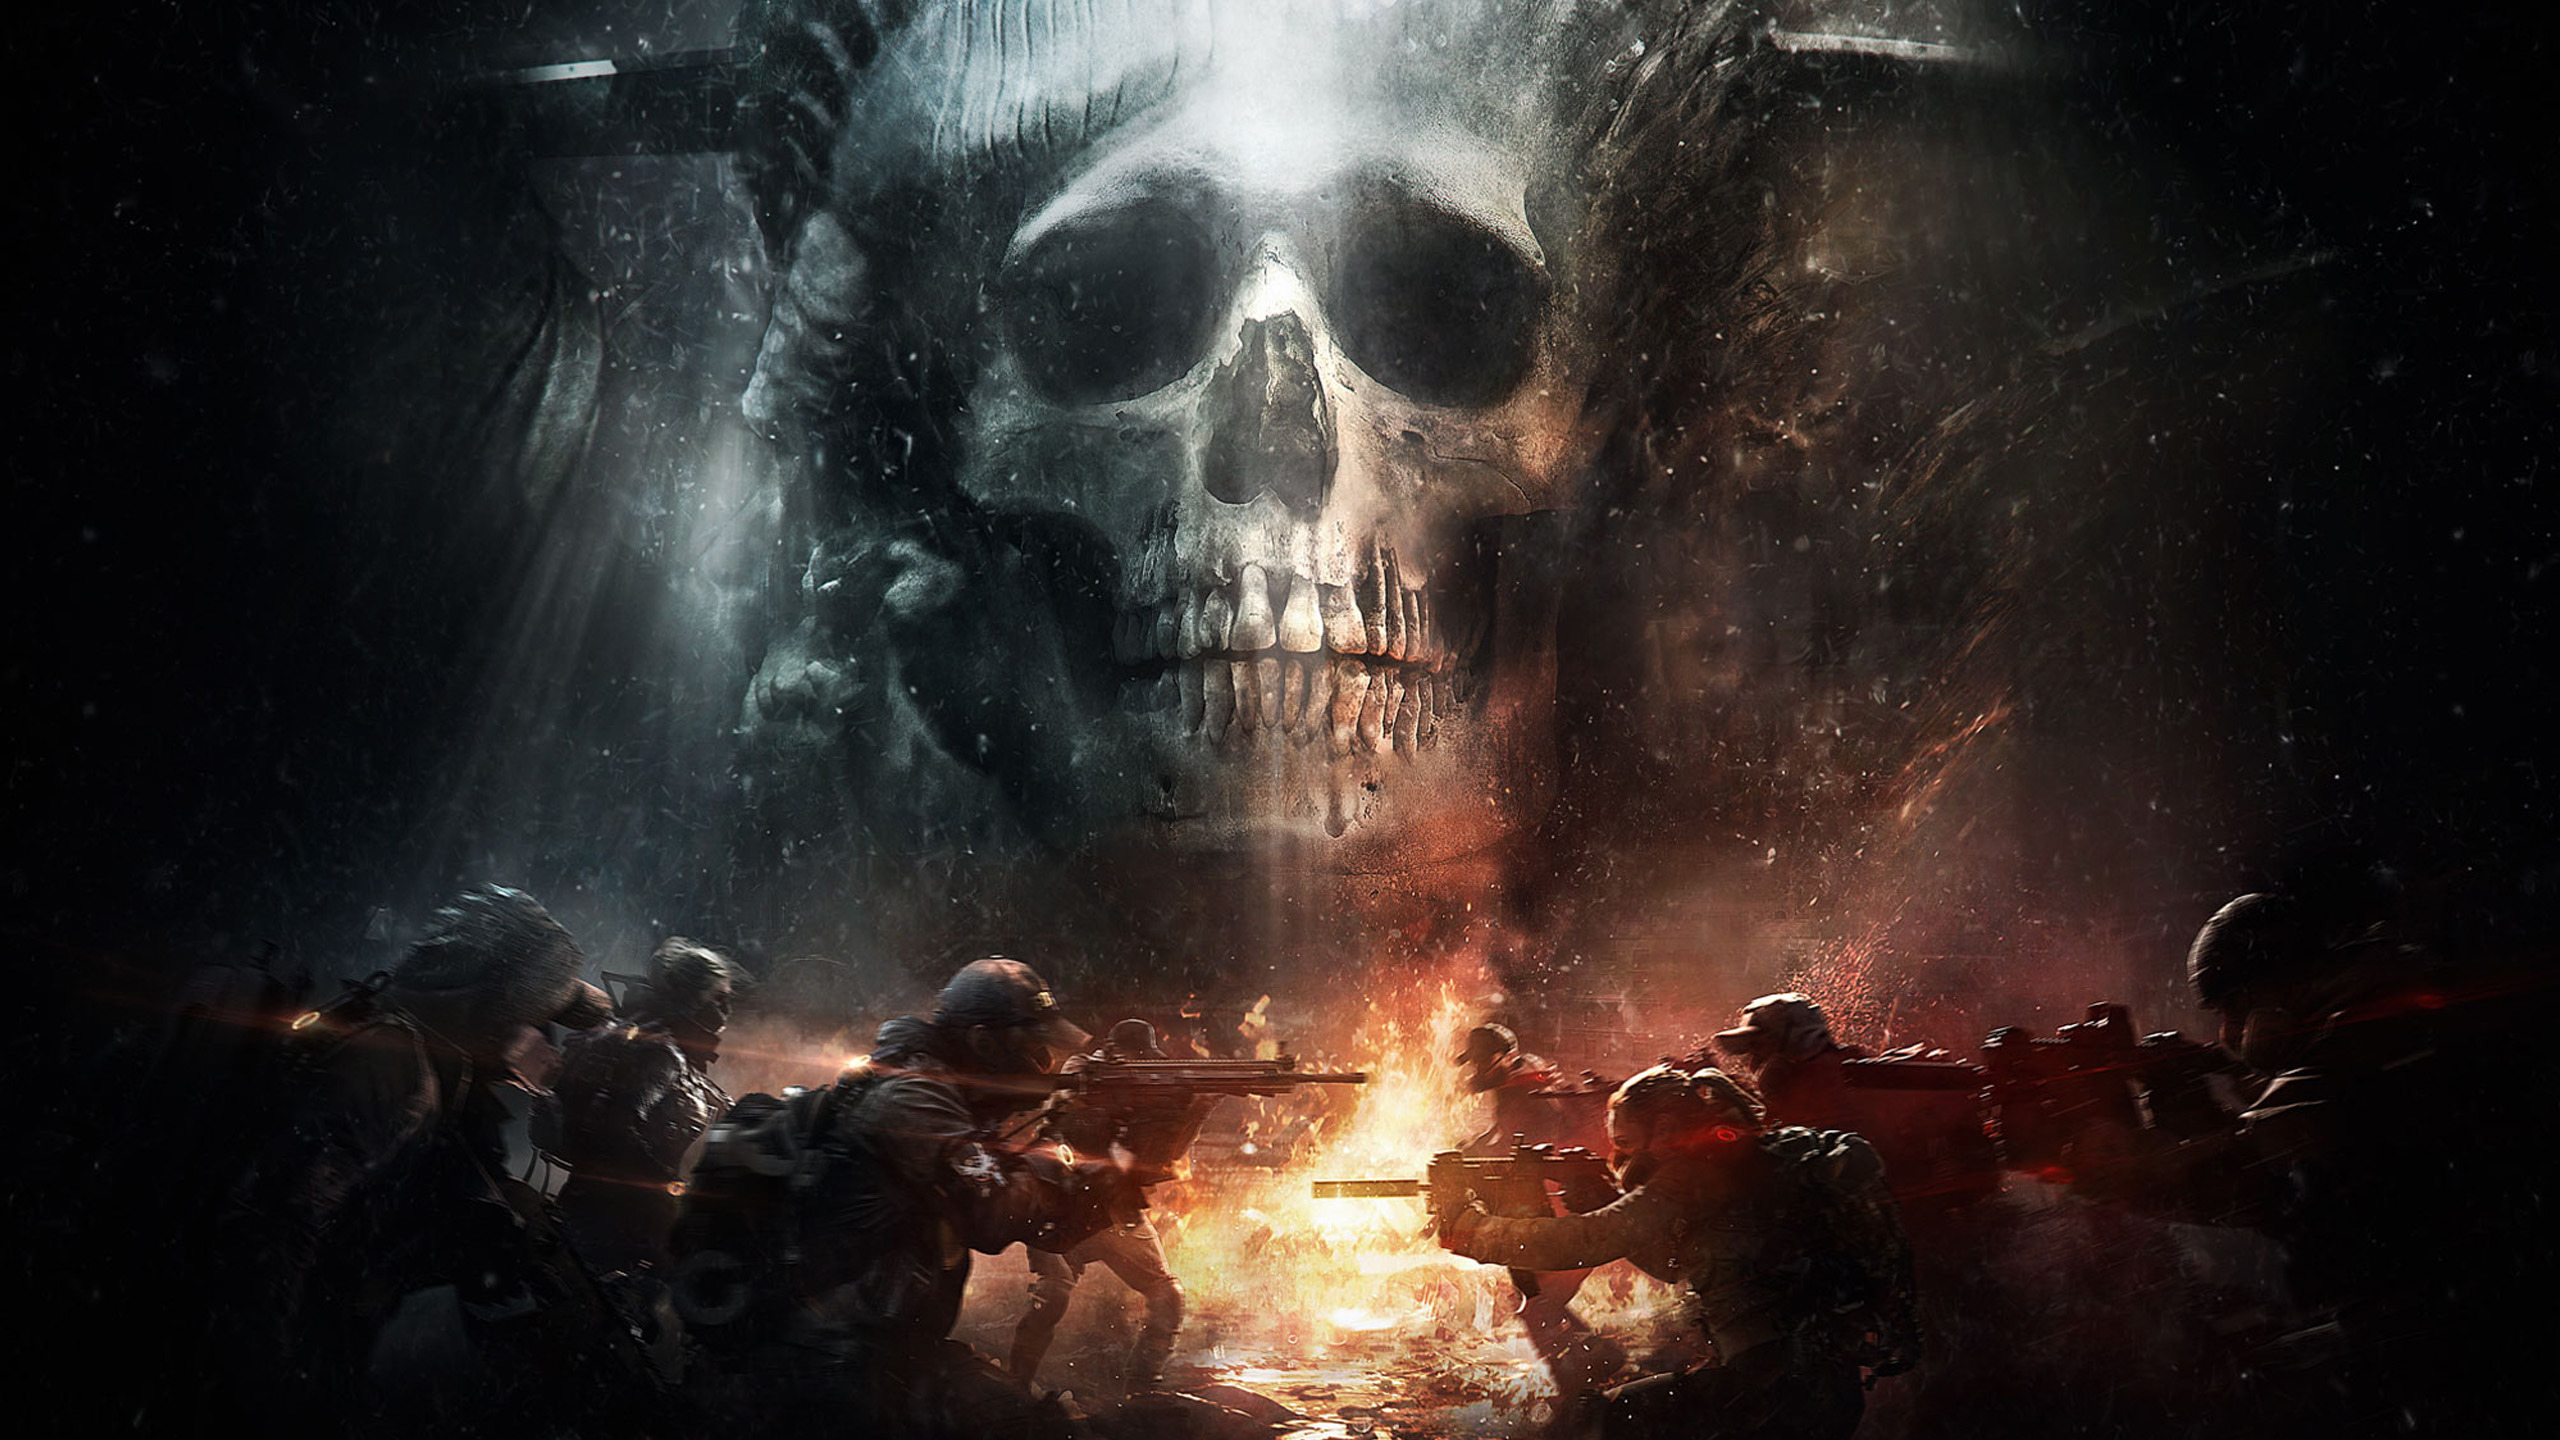 Download Wallpaper 2560x1440 Tom Clancy S The Division Game Skull Soldiers Dual Wide 16 9 2560x1440 Hd Background 2772